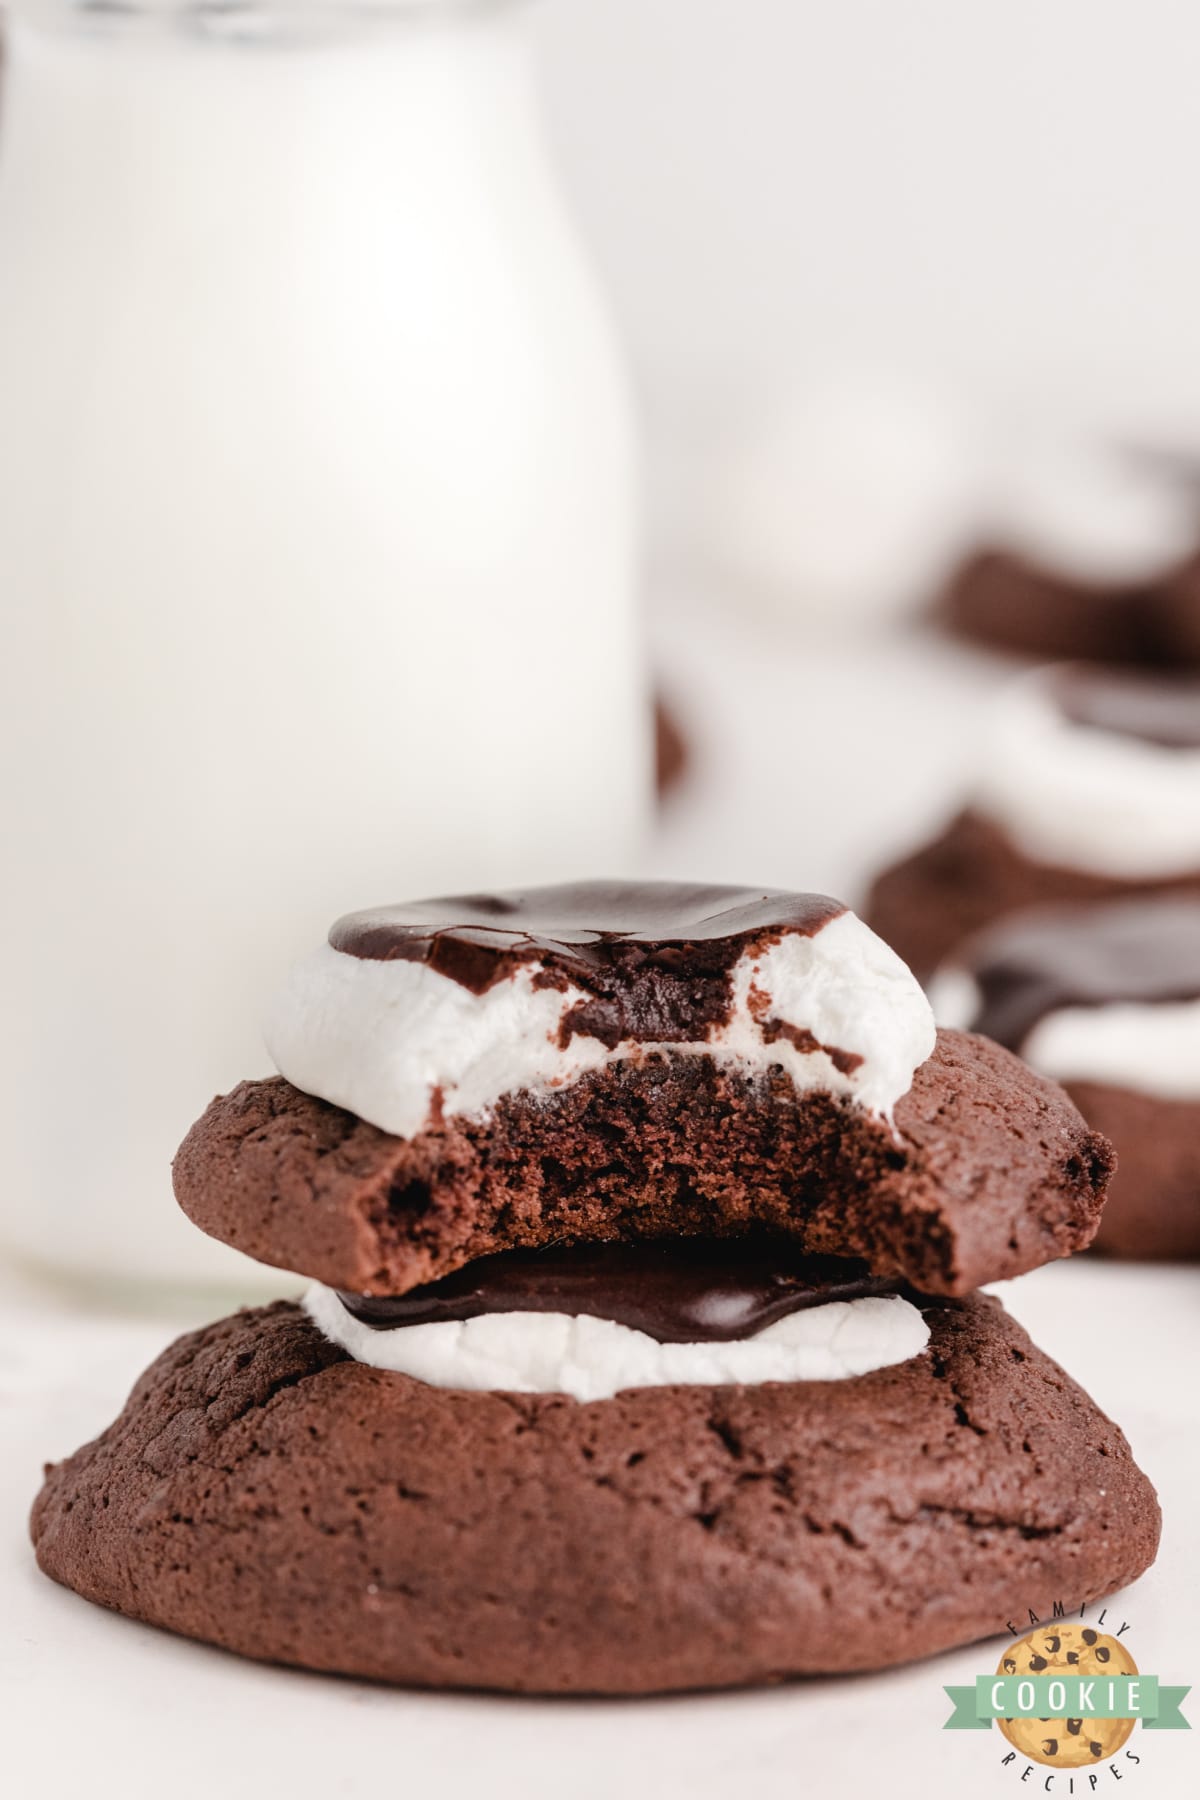 Thick chocolate cookies with marshmallows and chocolate frosting on top